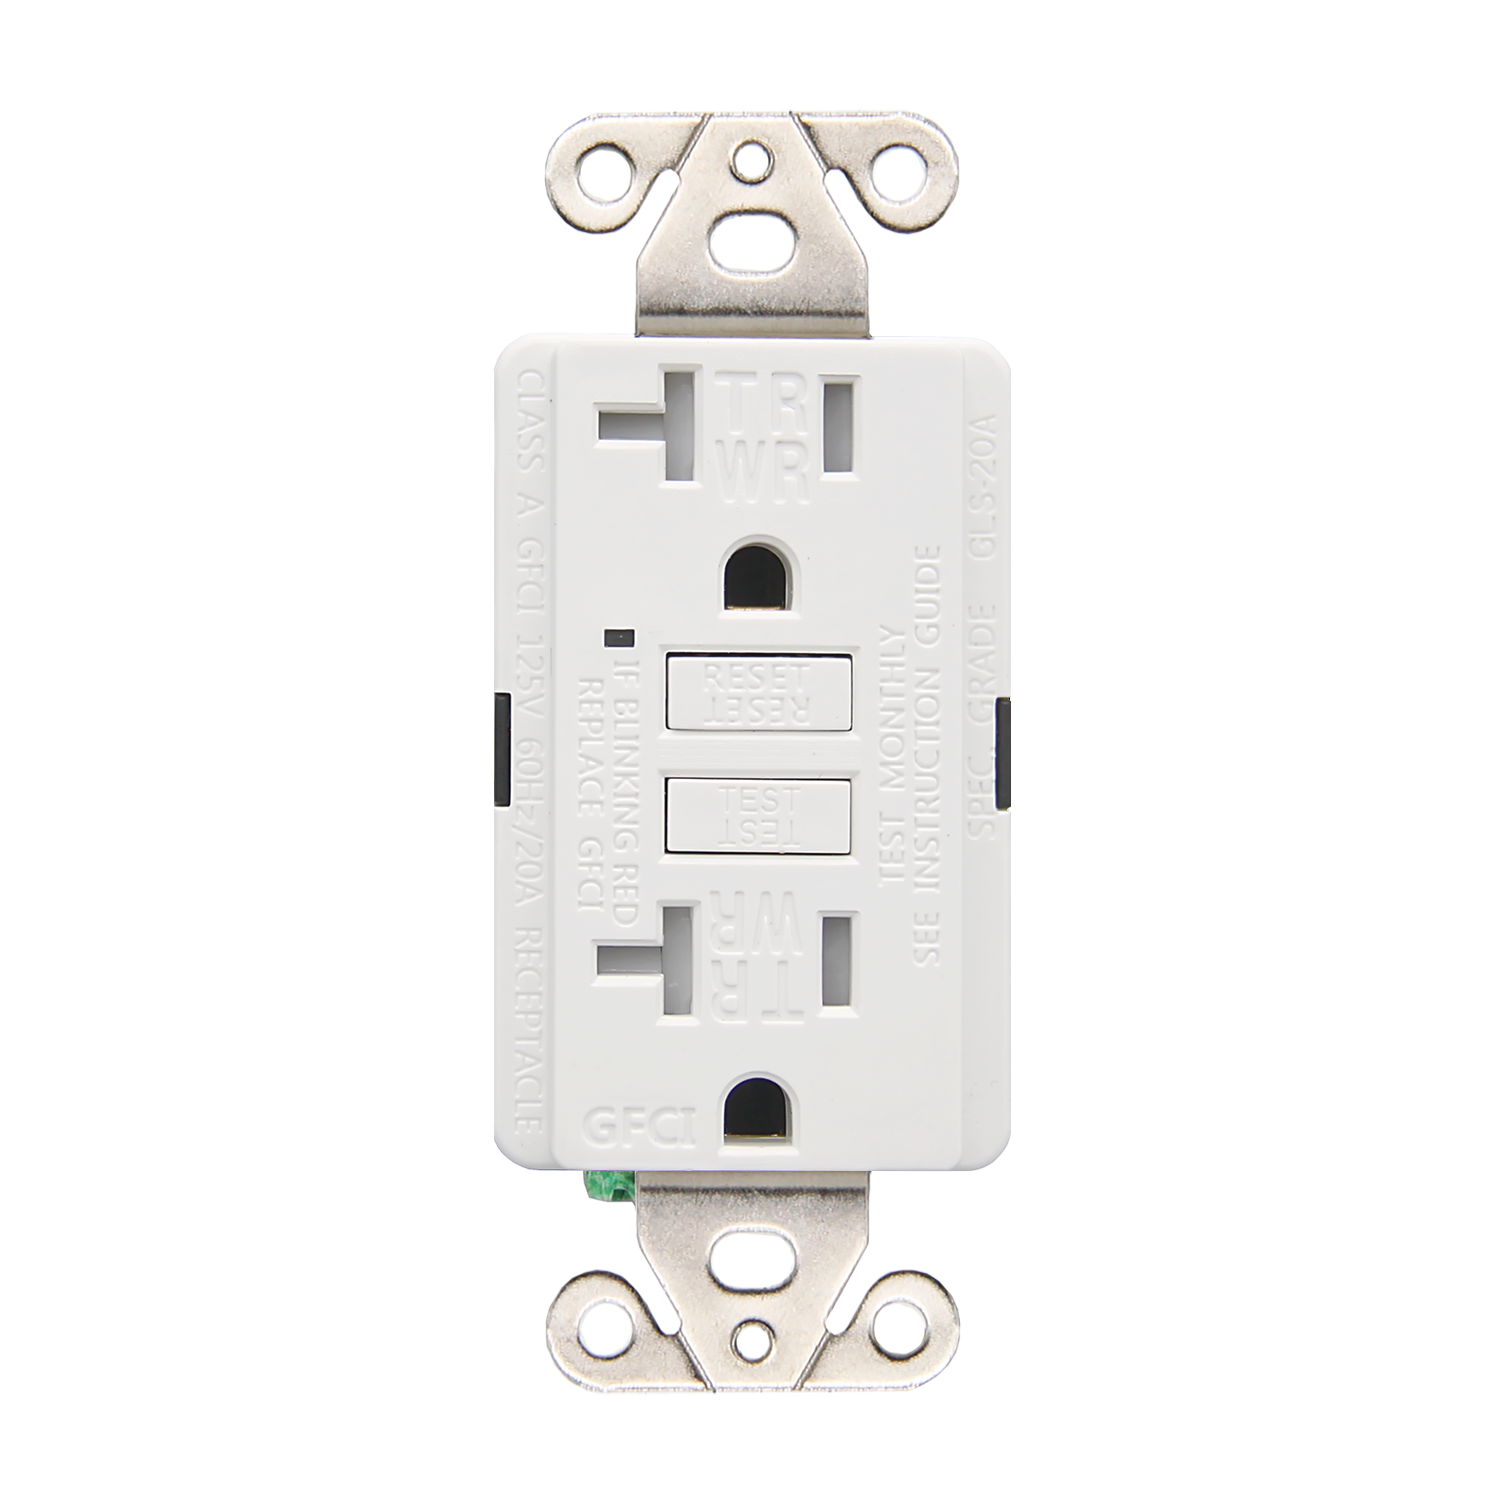 Faith GFCI Outlets GLS-20ATRWR 20Amp Self-Test Tamper And Weather-Resistant Duplex GFCI Outlet Indoor Or Outdoor Use